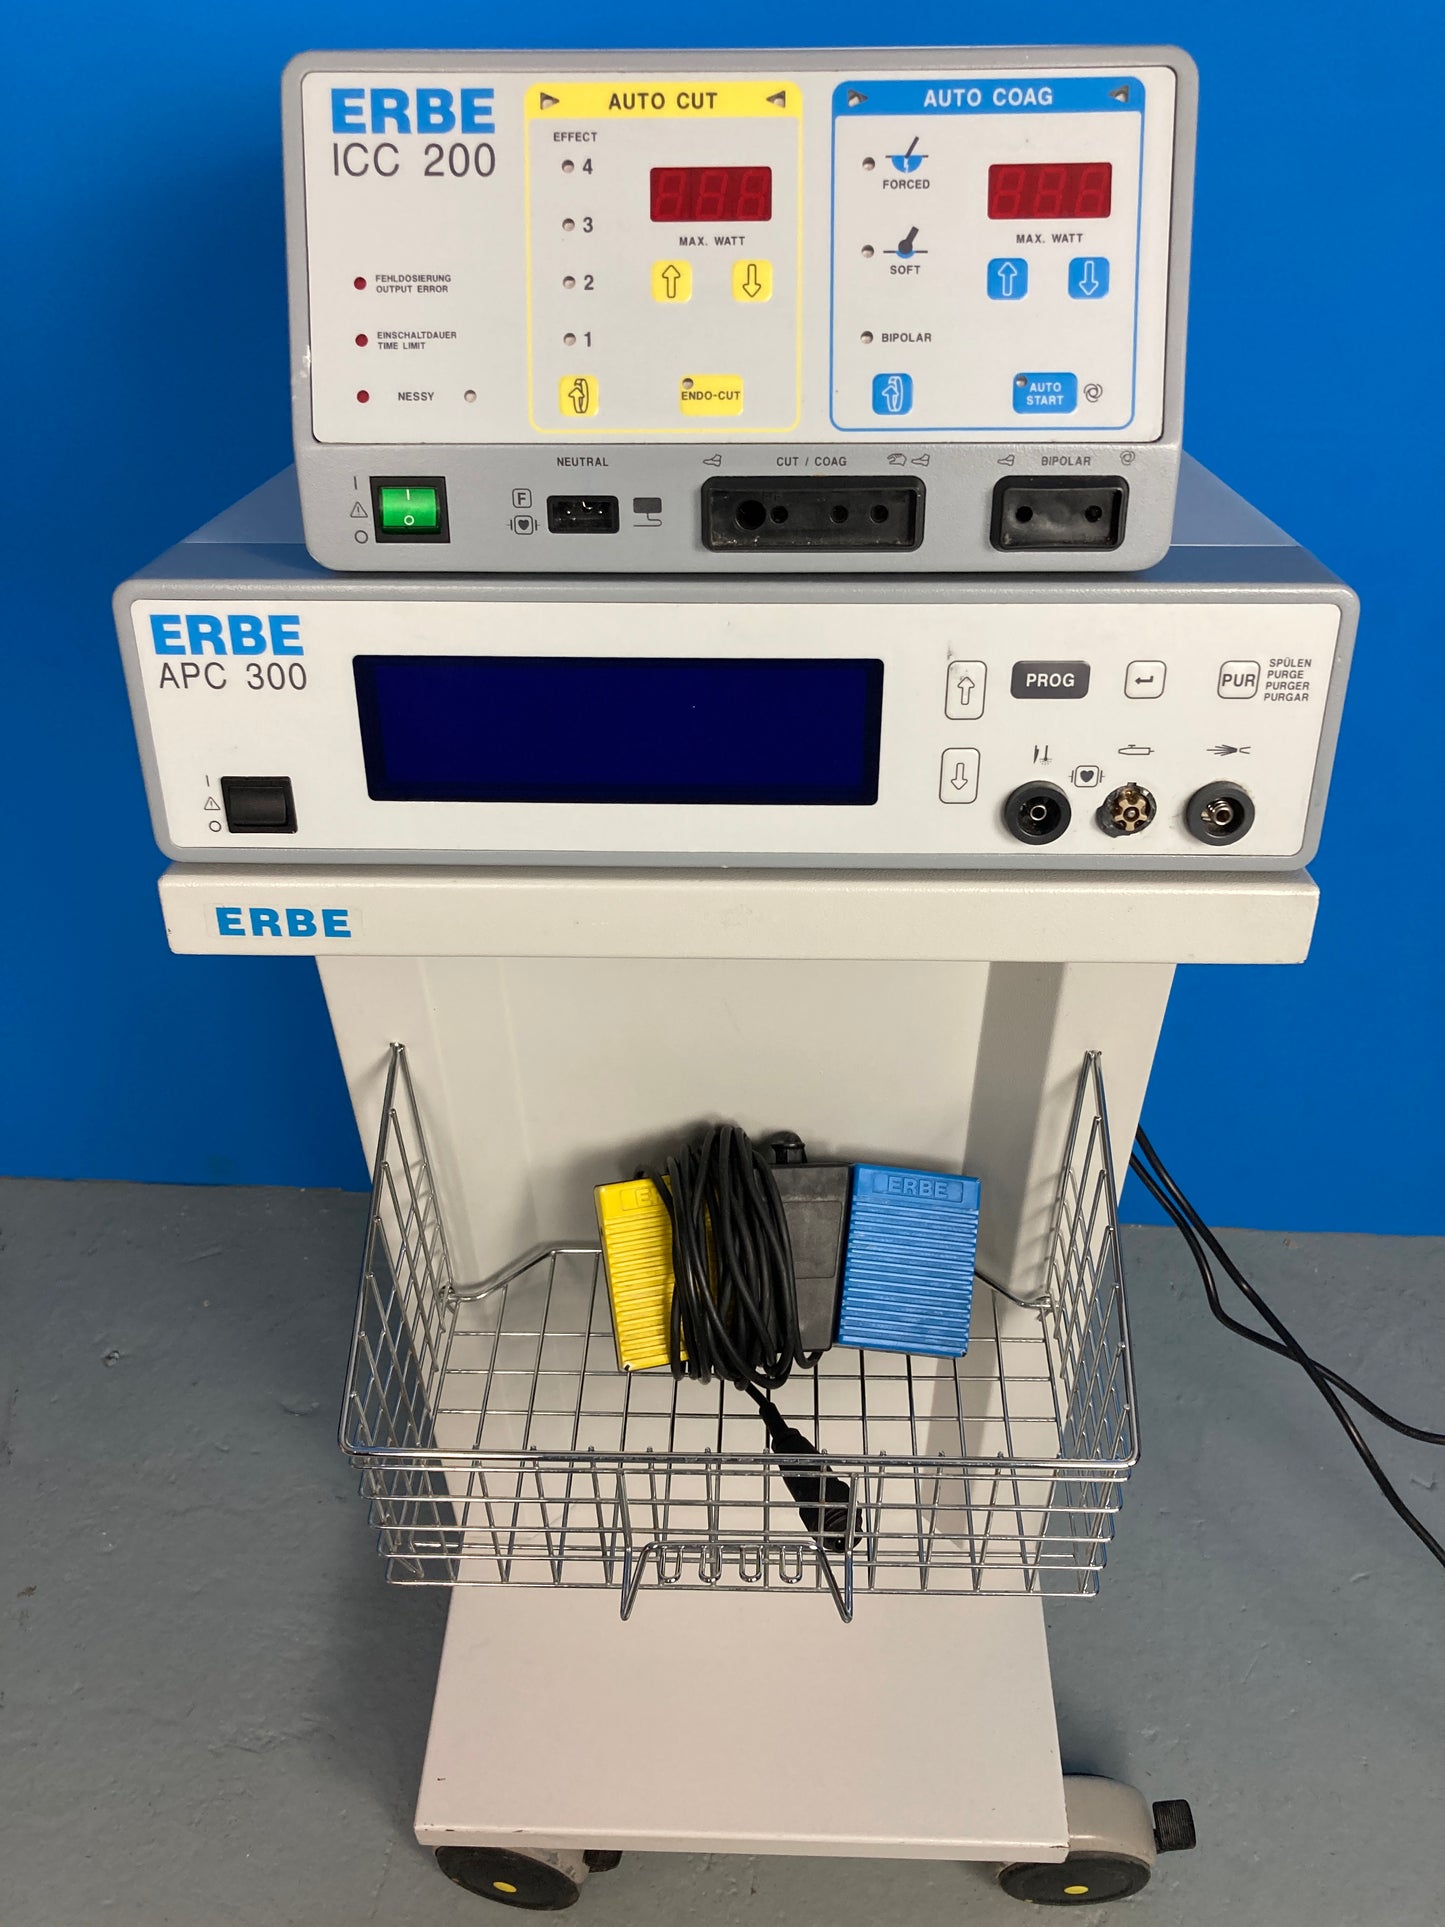 Erbe ICC 200 With APC 300 Electrosurgical Unit On Trolley